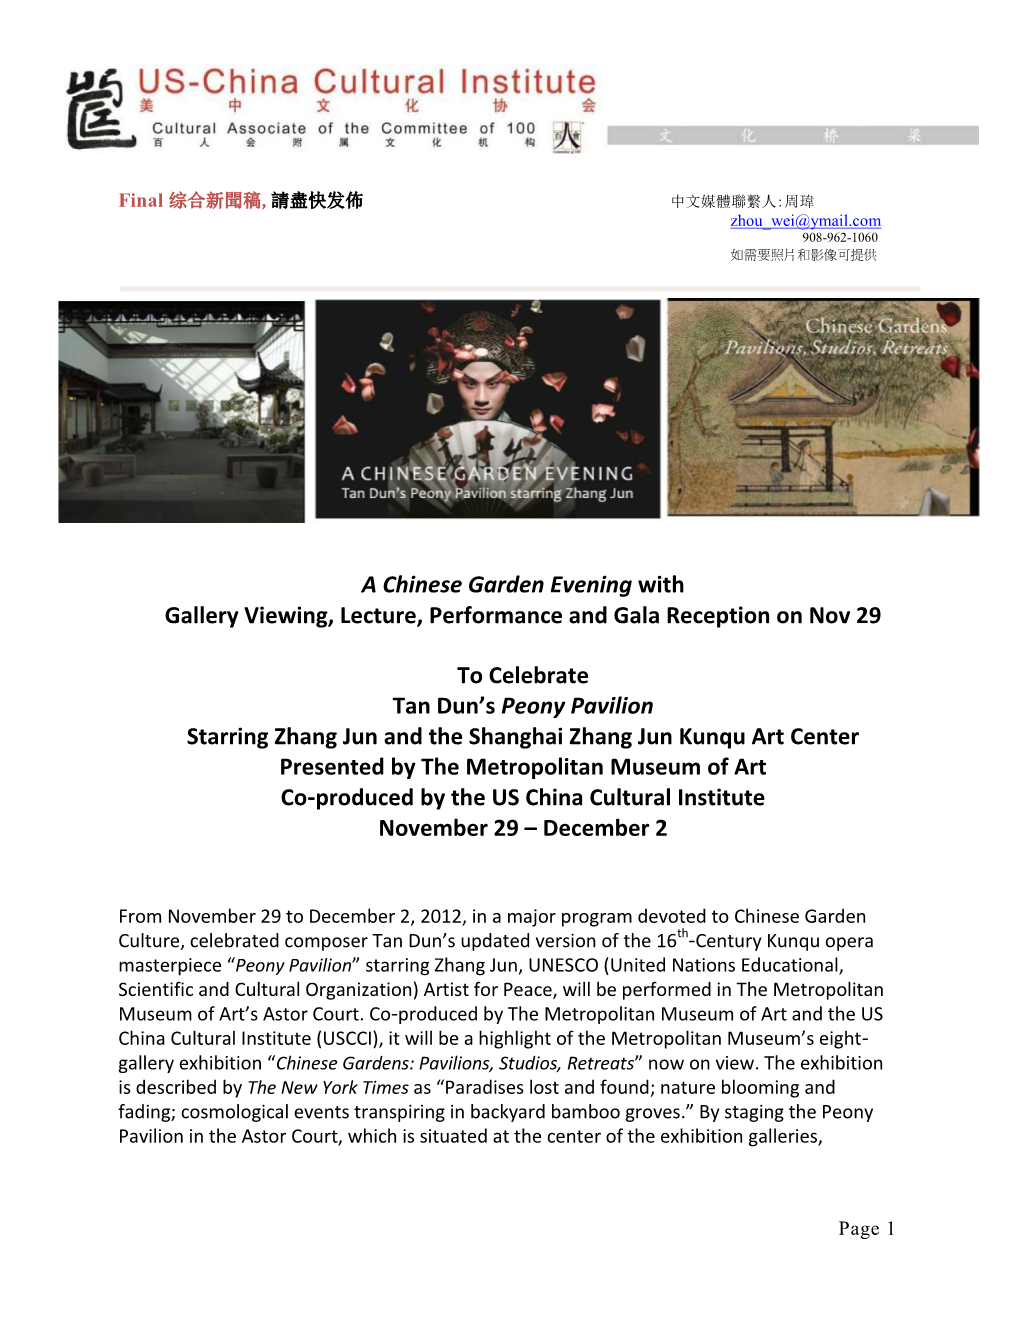 A Chinese Garden Evening with Gallery Viewing, Lecture, Performance and Gala Reception on Nov 29